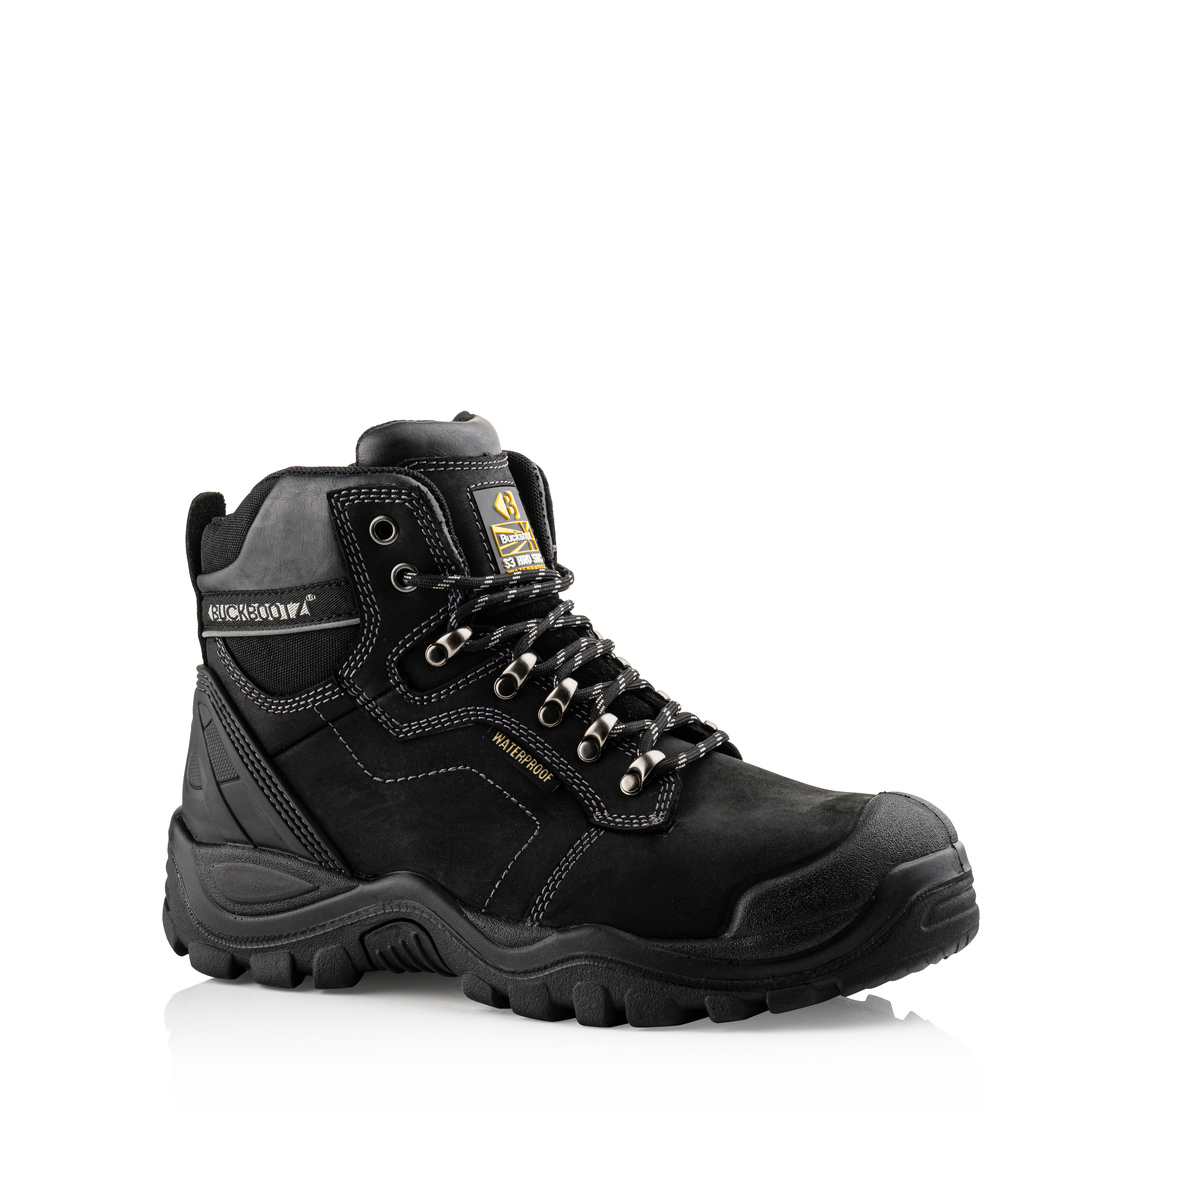 Buckler Buckshot BSH009 Leather Lace Safety Boots Work Boots 